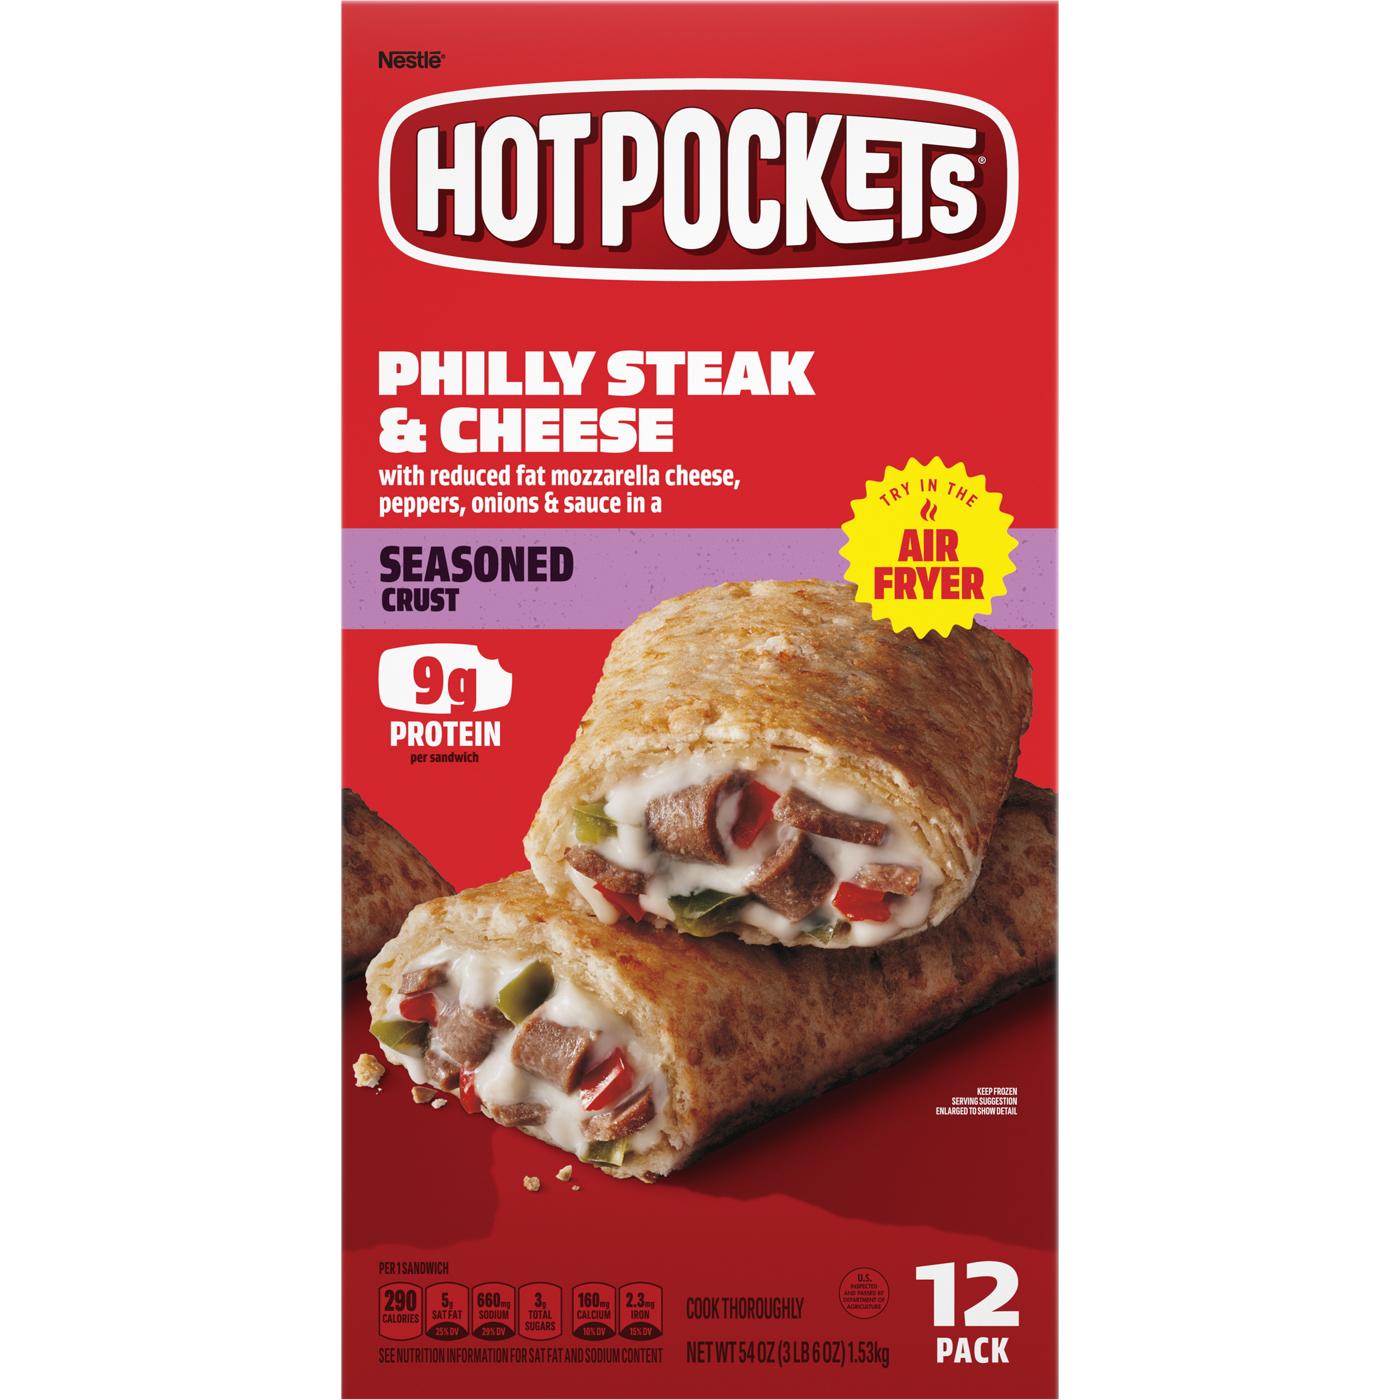 Hot Pockets Philly Steak & Cheese Frozen Sandwiches - Seasoned Crust; image 1 of 7